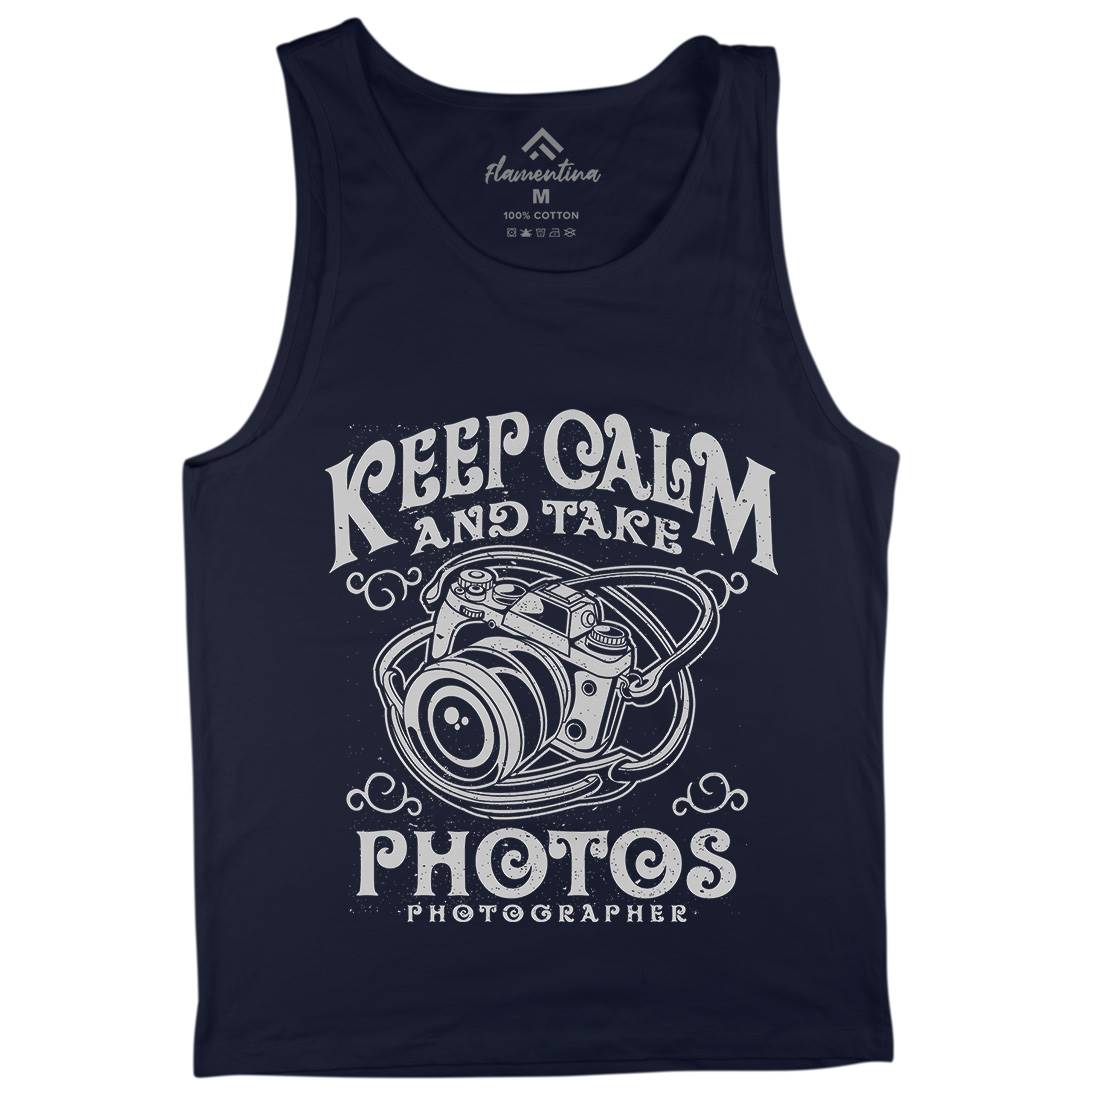 Keep Calm And Take Photos Mens Tank Top Vest Media A073